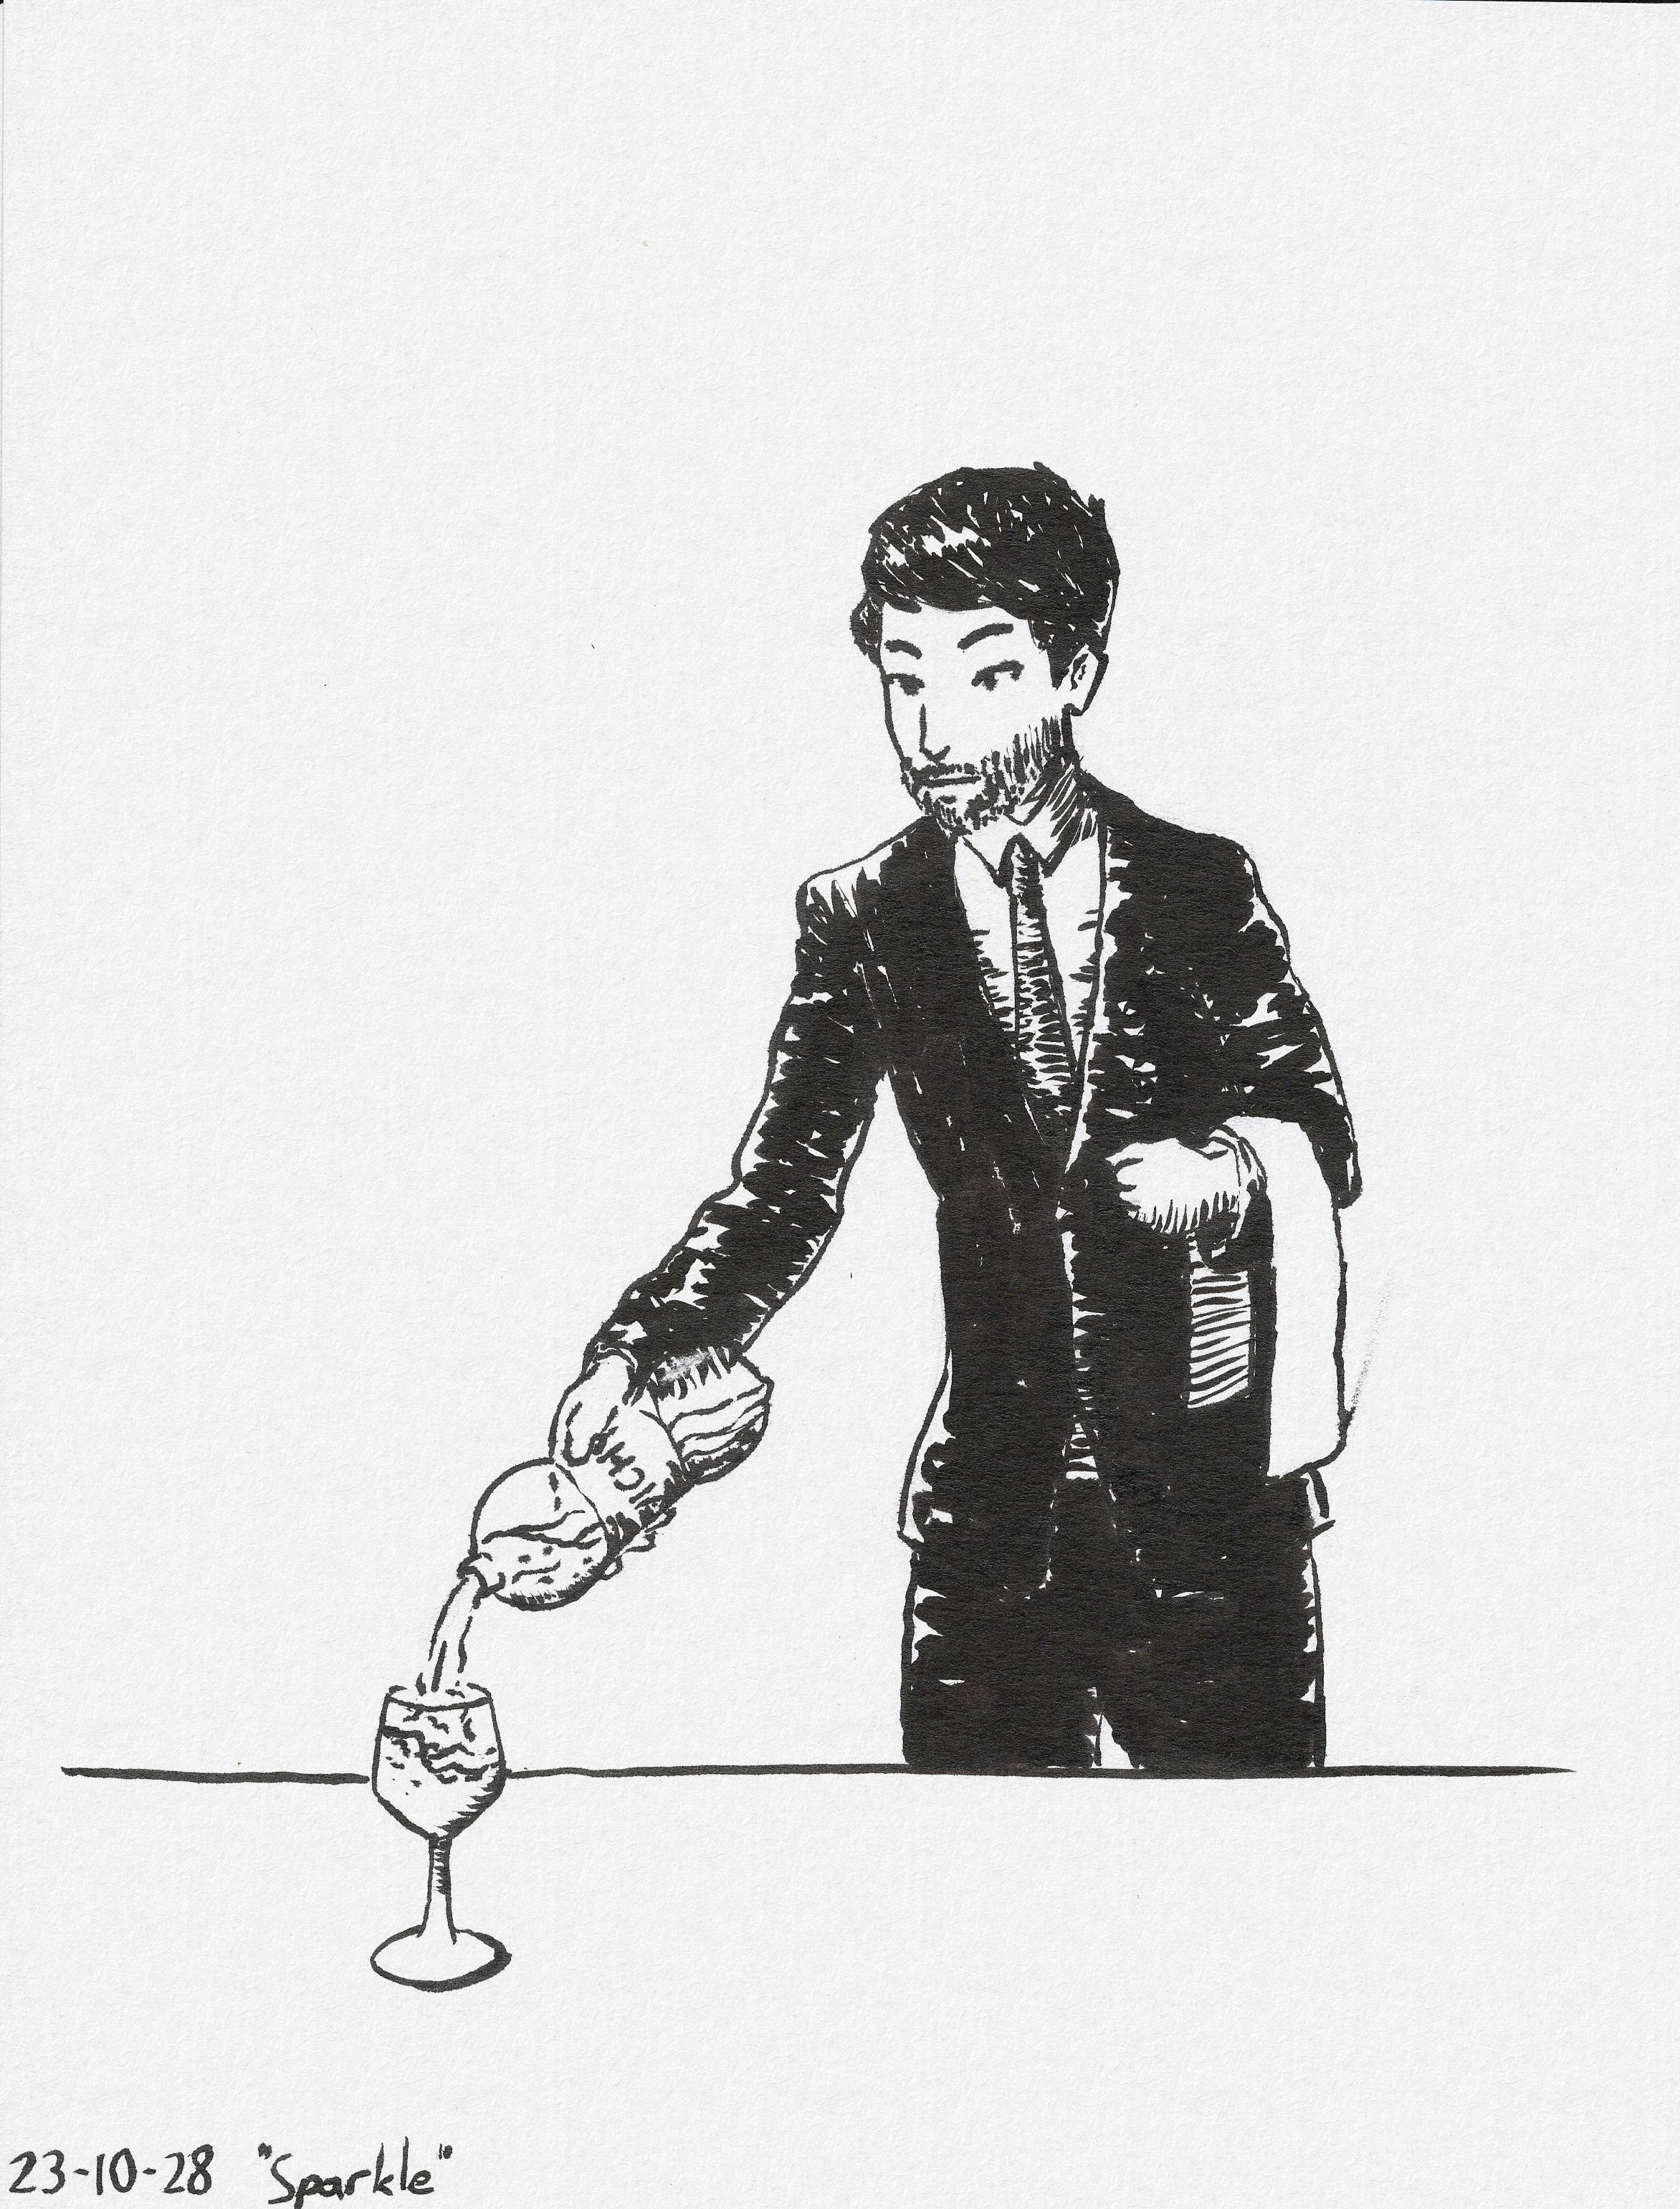 A waiter in a suit and tie pouring sparkling water out of a plastic bottle.